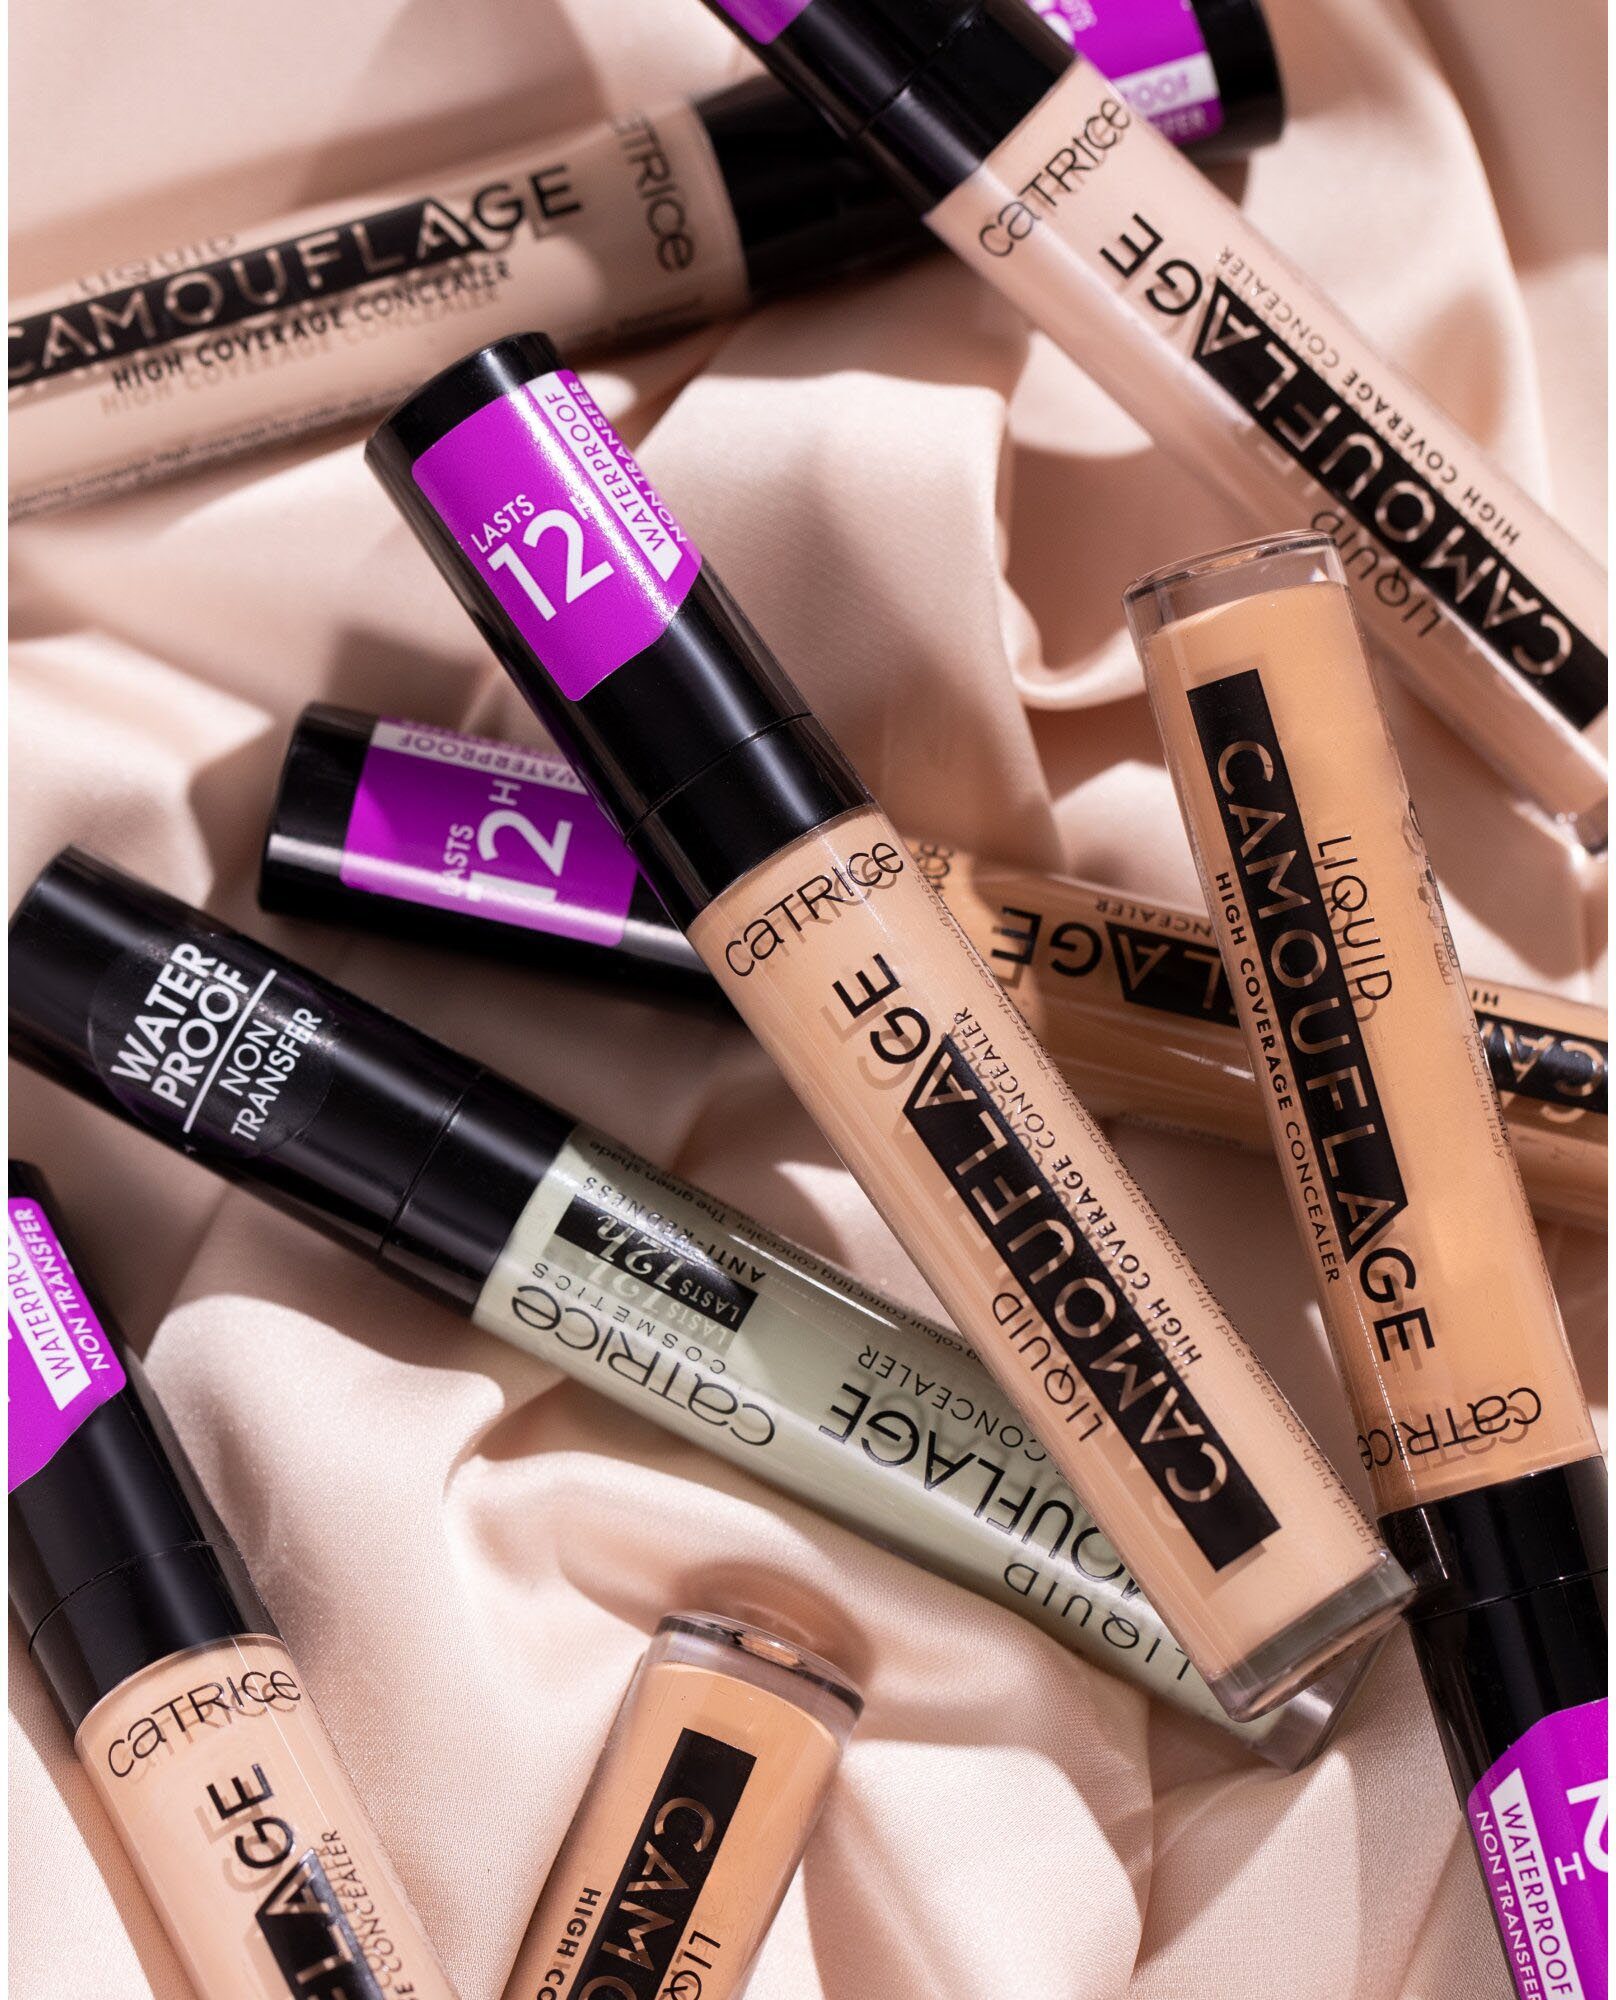 Porcellain 3er Liquid Pack High Coverage, Catrice Camouflage Concealer